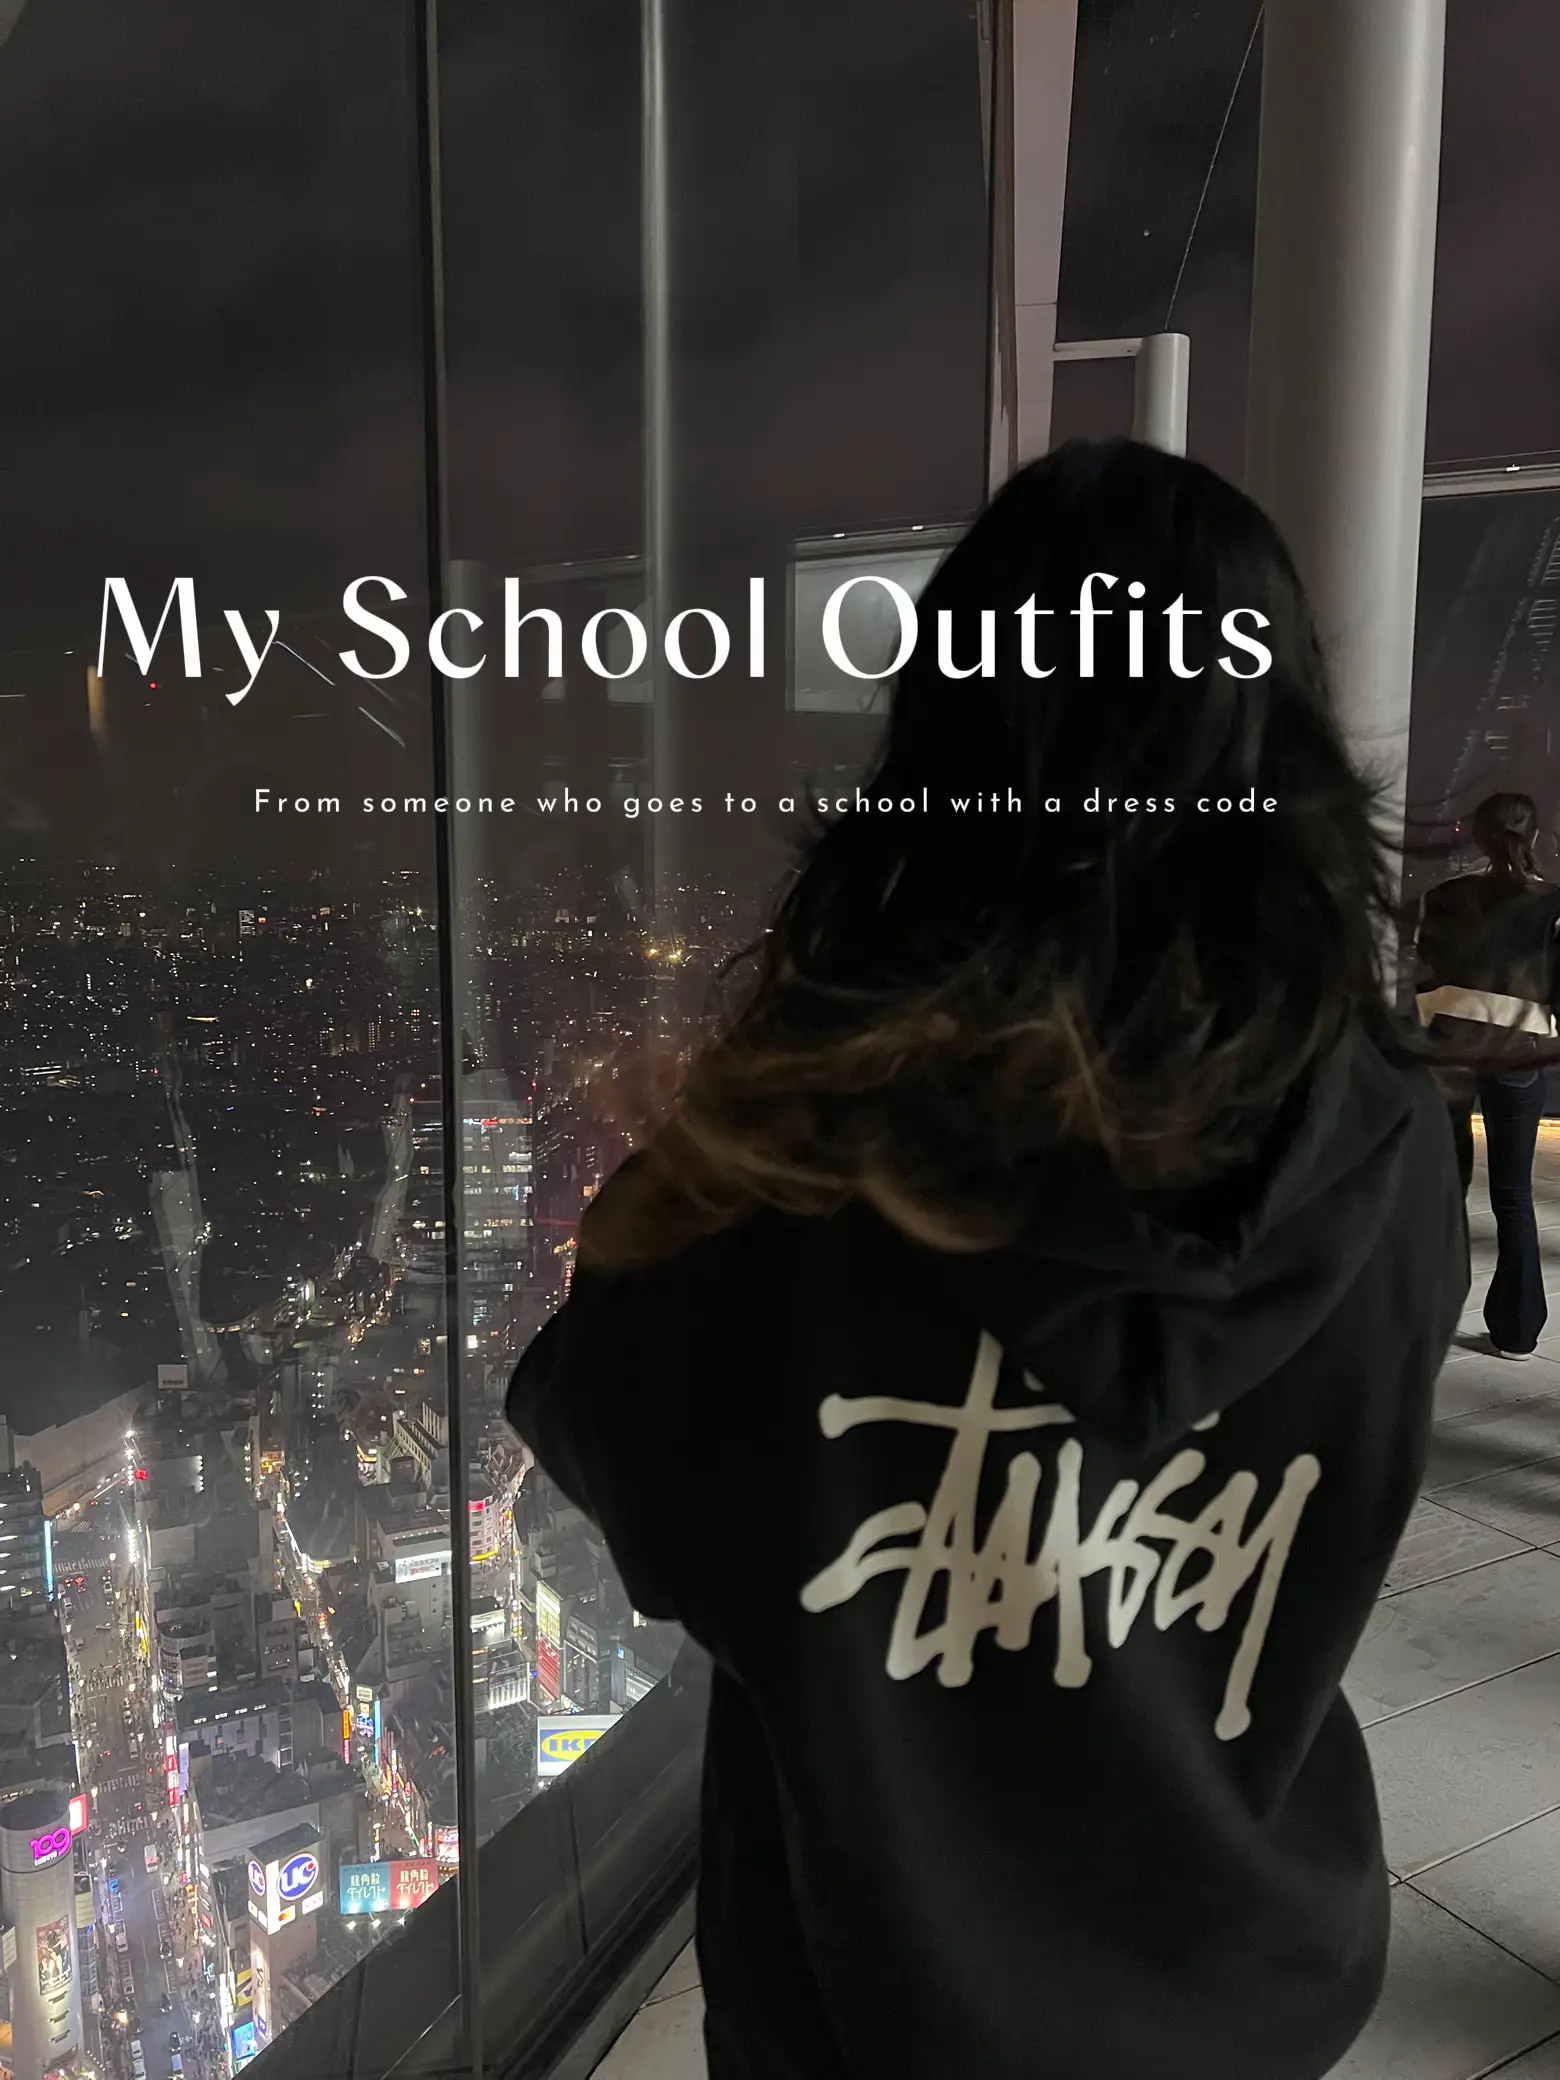 My School Outfits's images